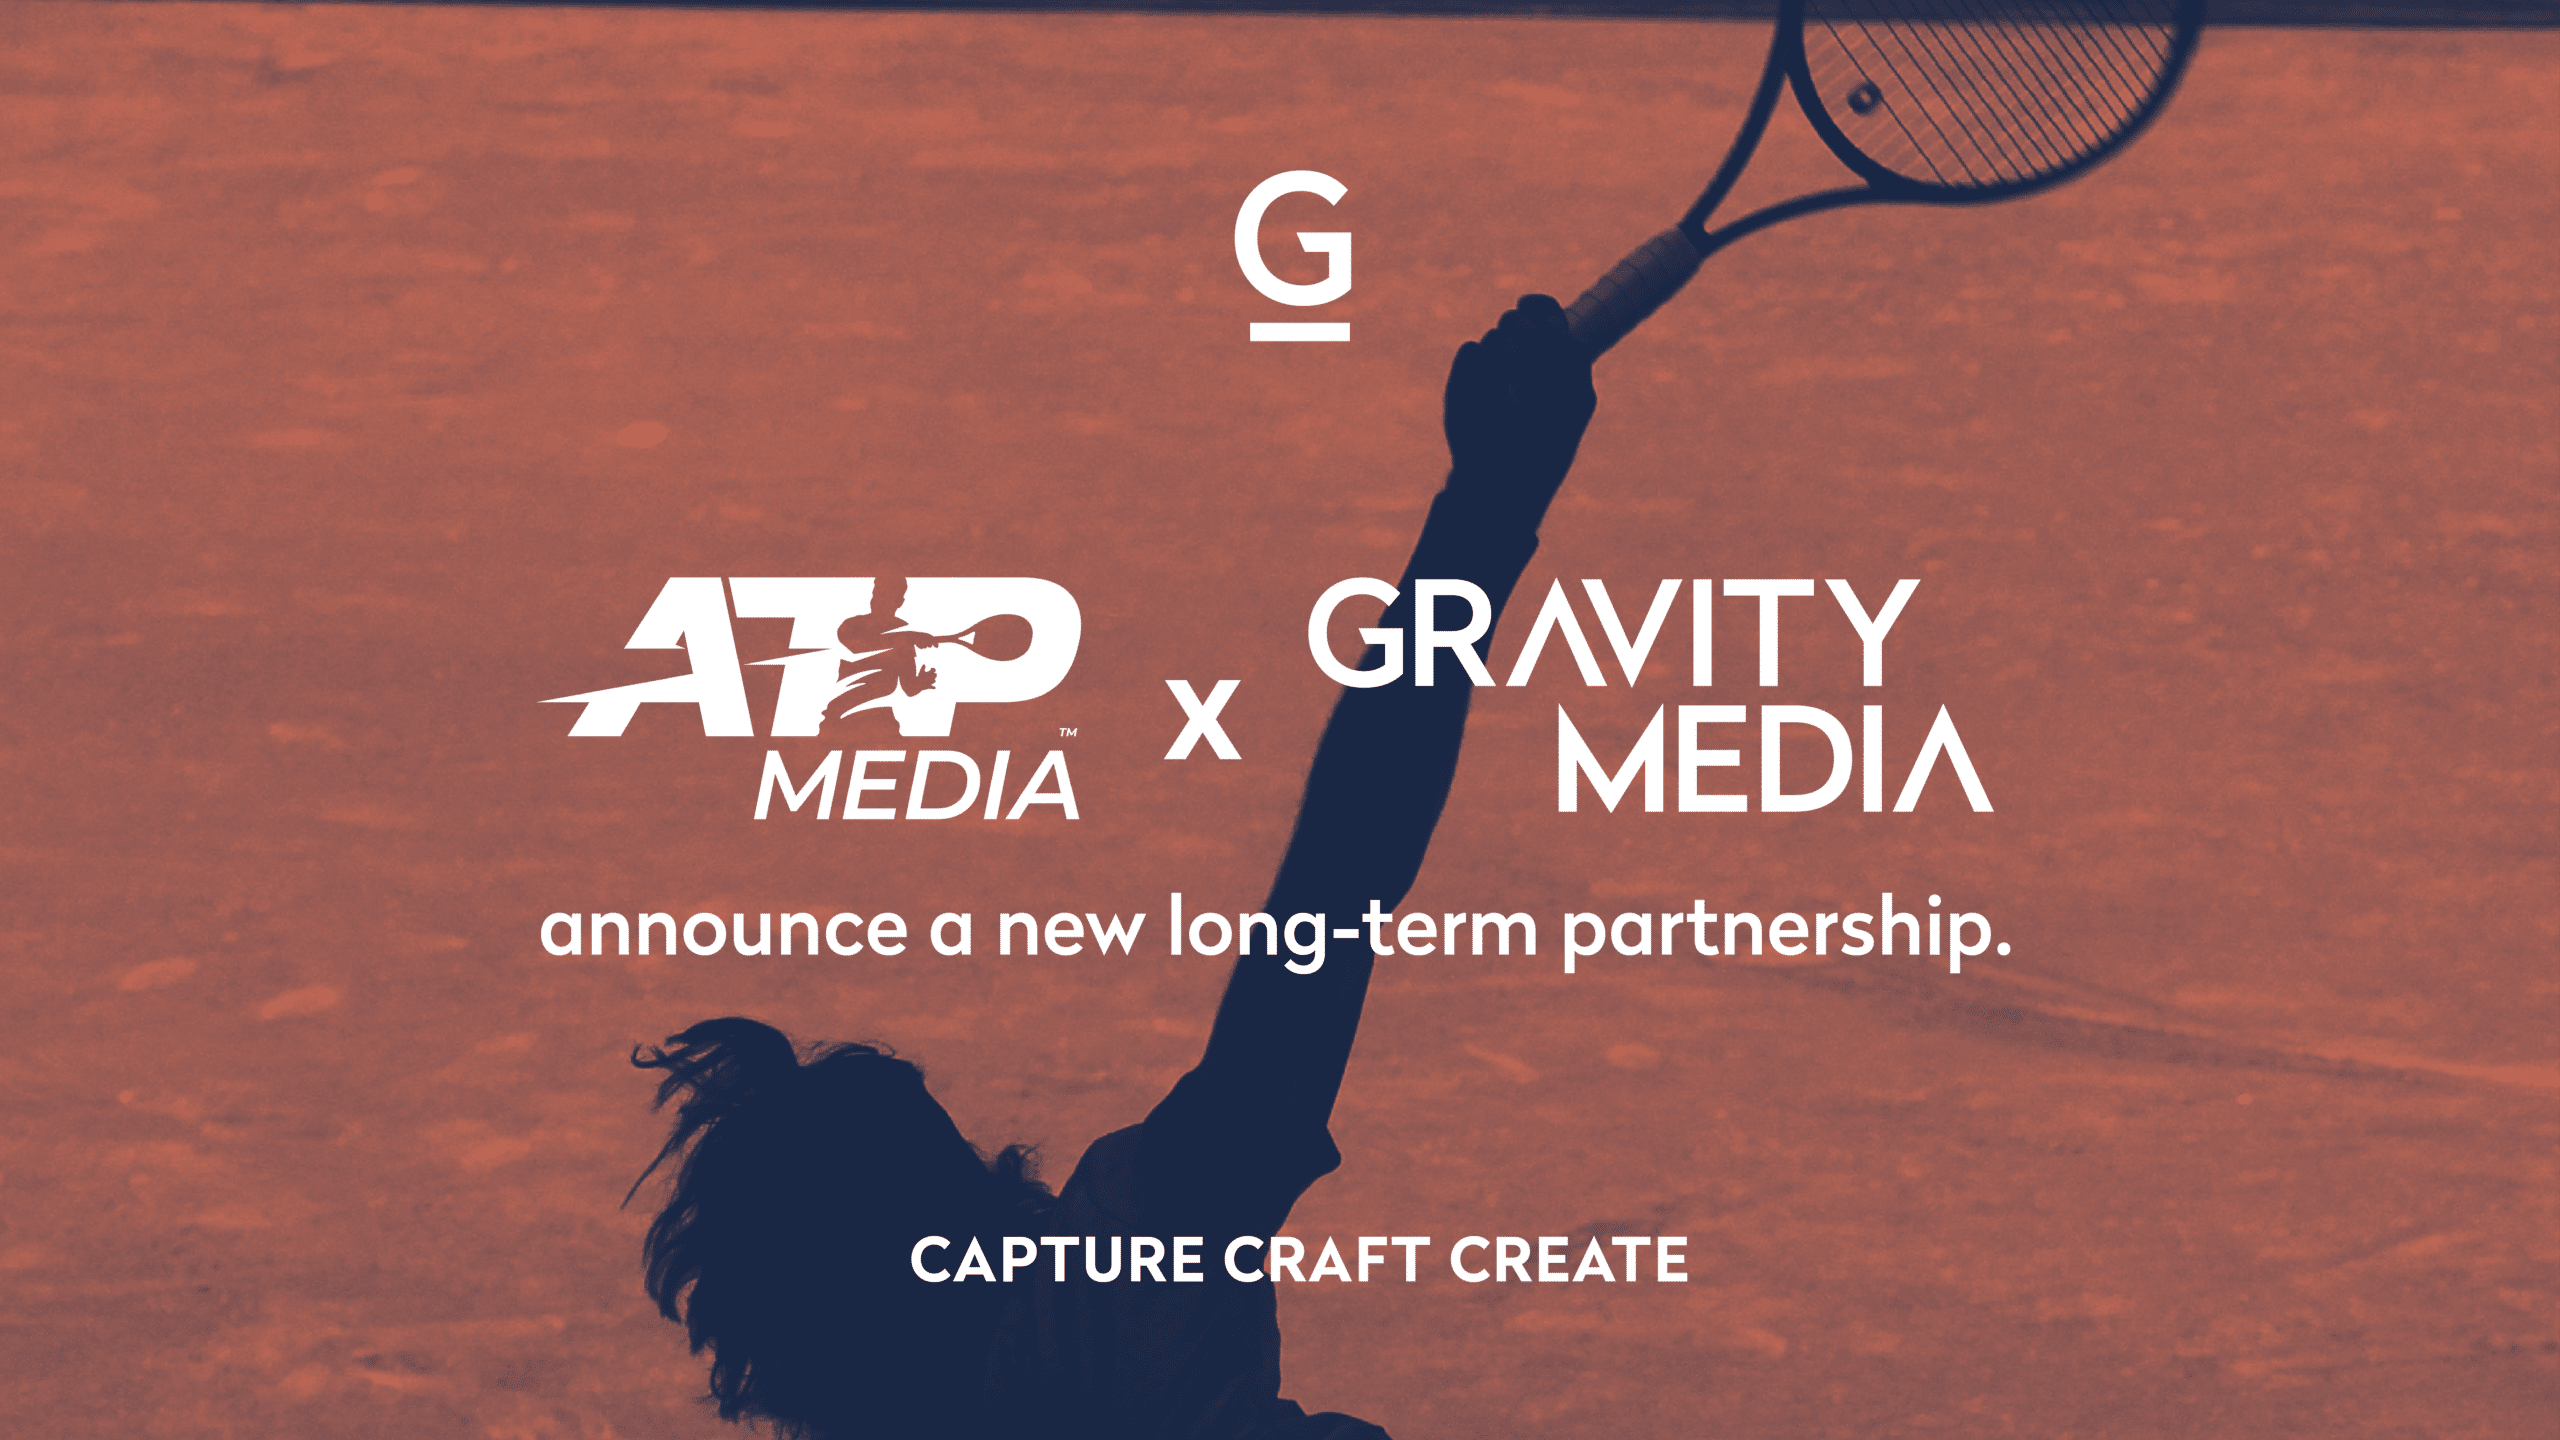 ATP Media and Gravity Media announce a new long-term partnership to deliver coverage of the ATP Tour live from ATP Media Studios based at Gravity Medias new Production Centre in London -